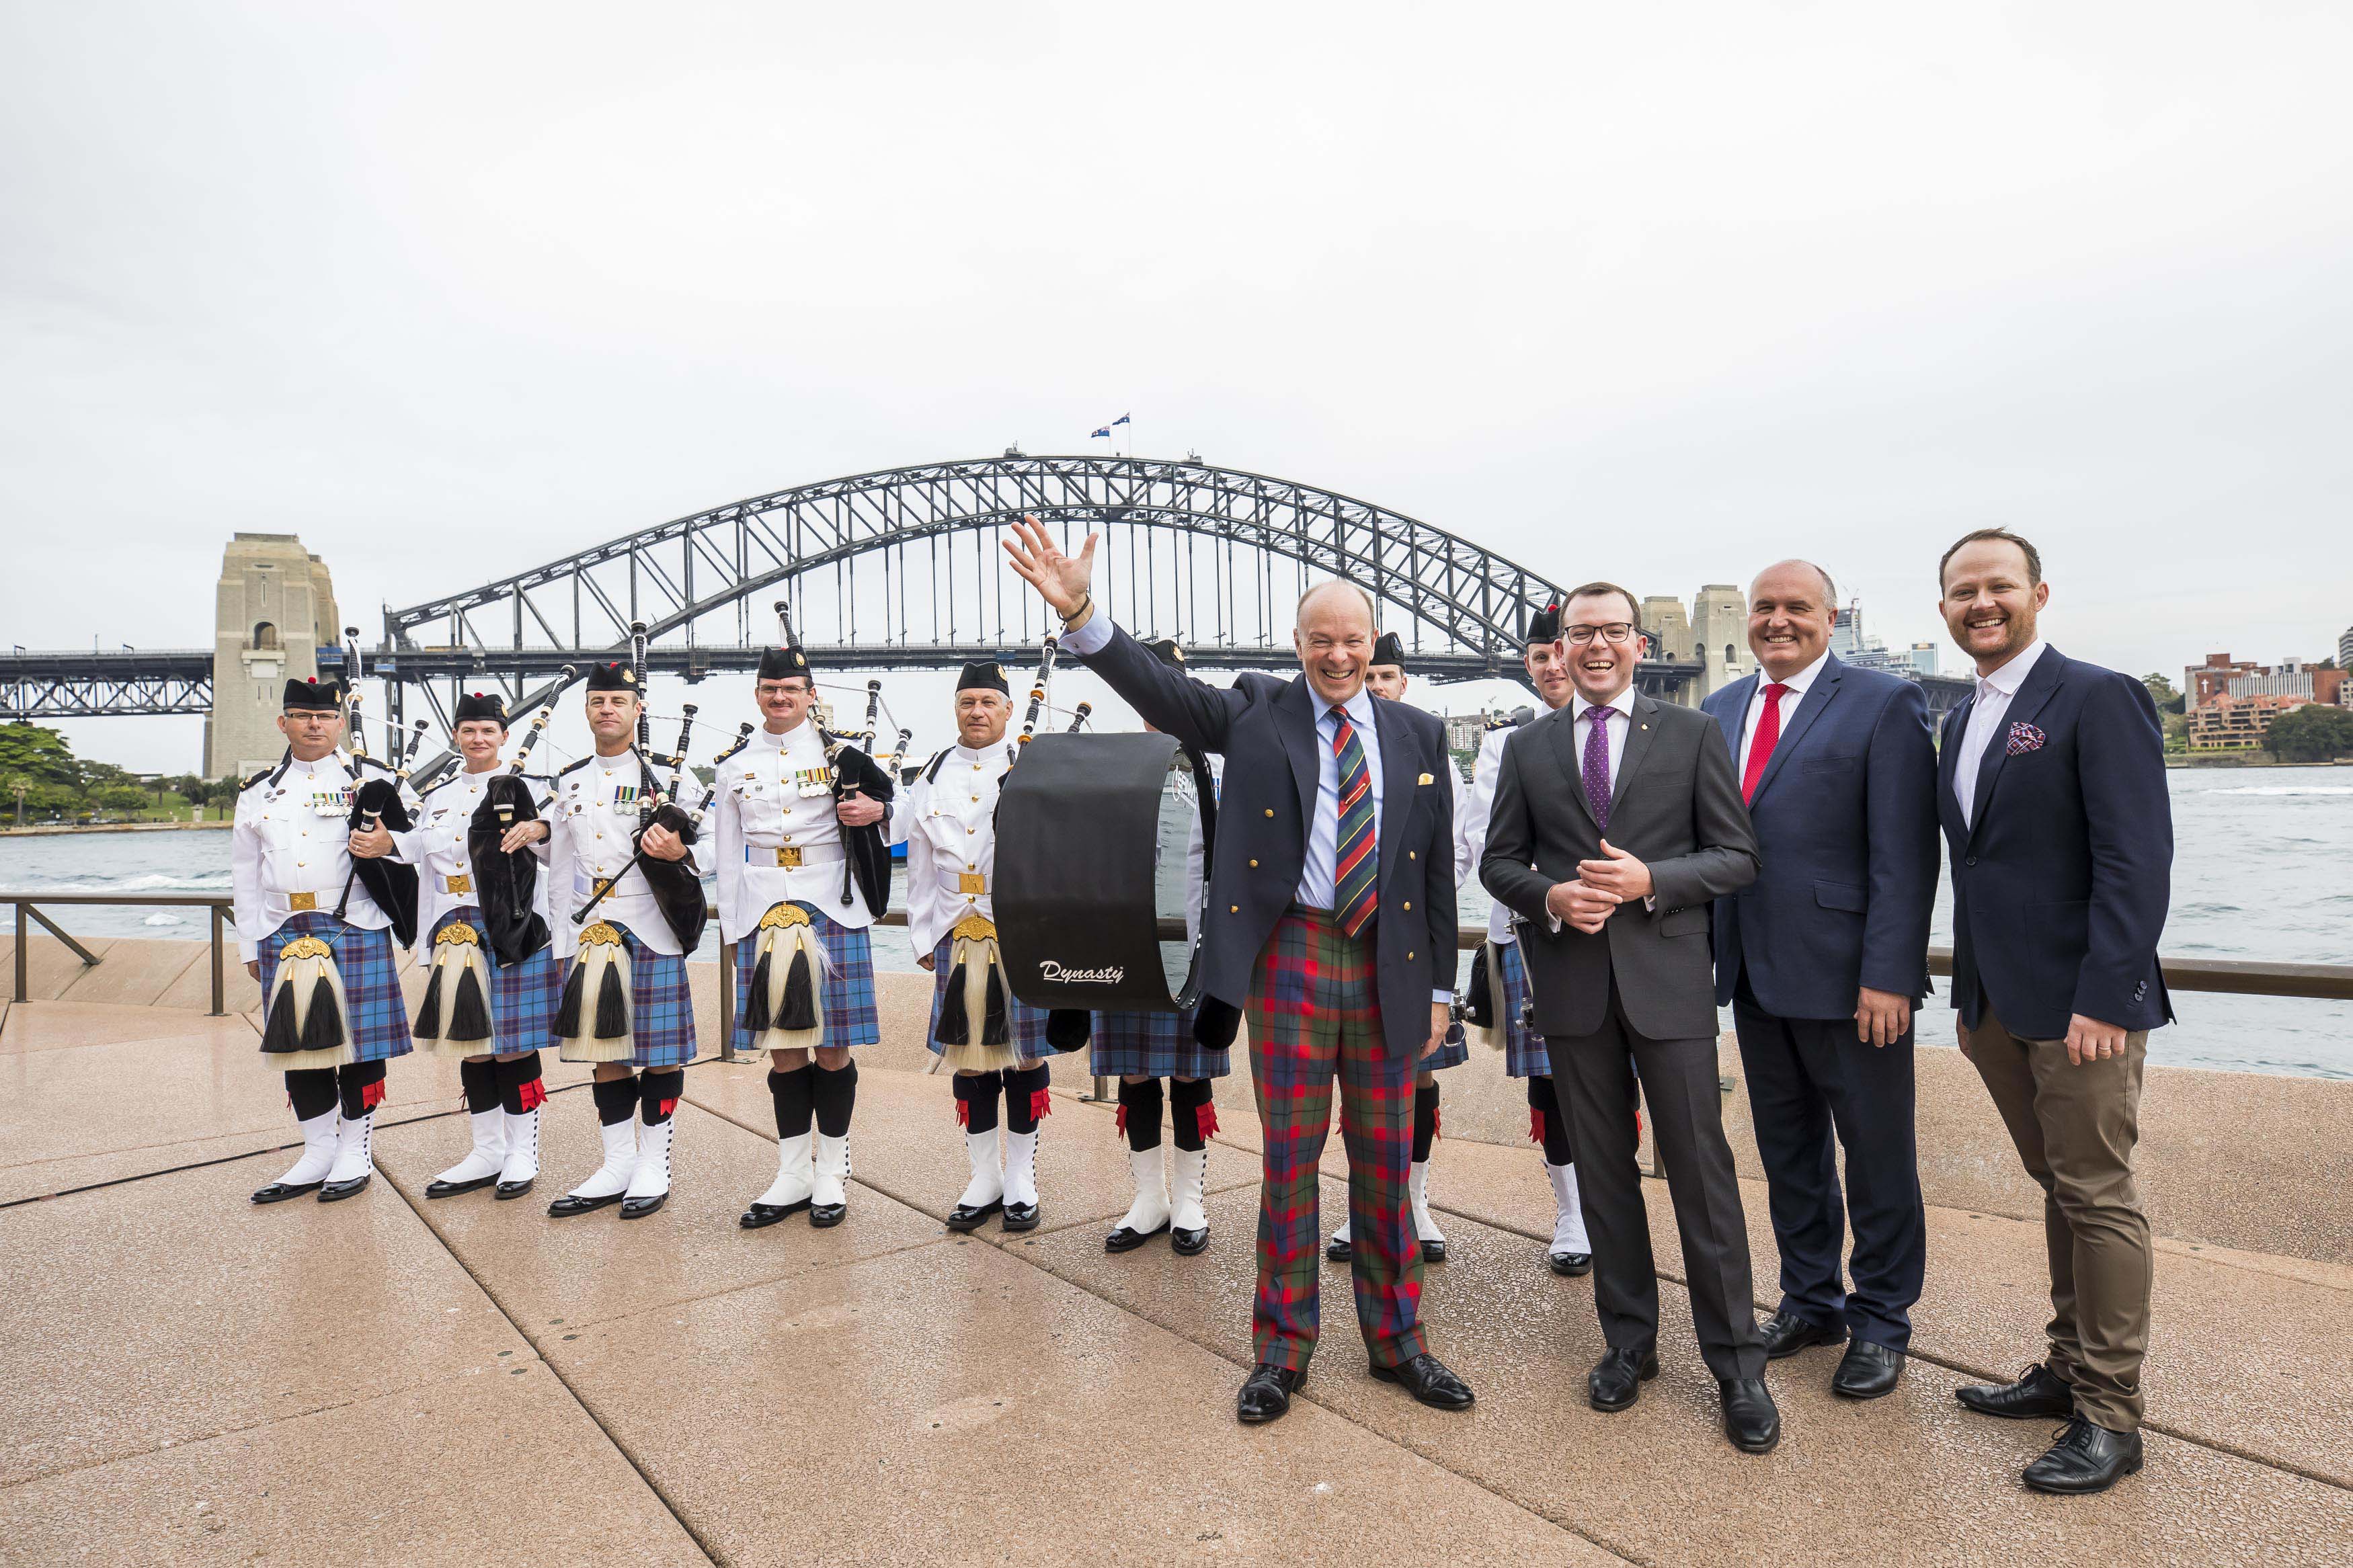 The Royal Edinburgh Military Tattoo has announced that it will stage a four-night showcase in Sydney next year (Anna Kucera)